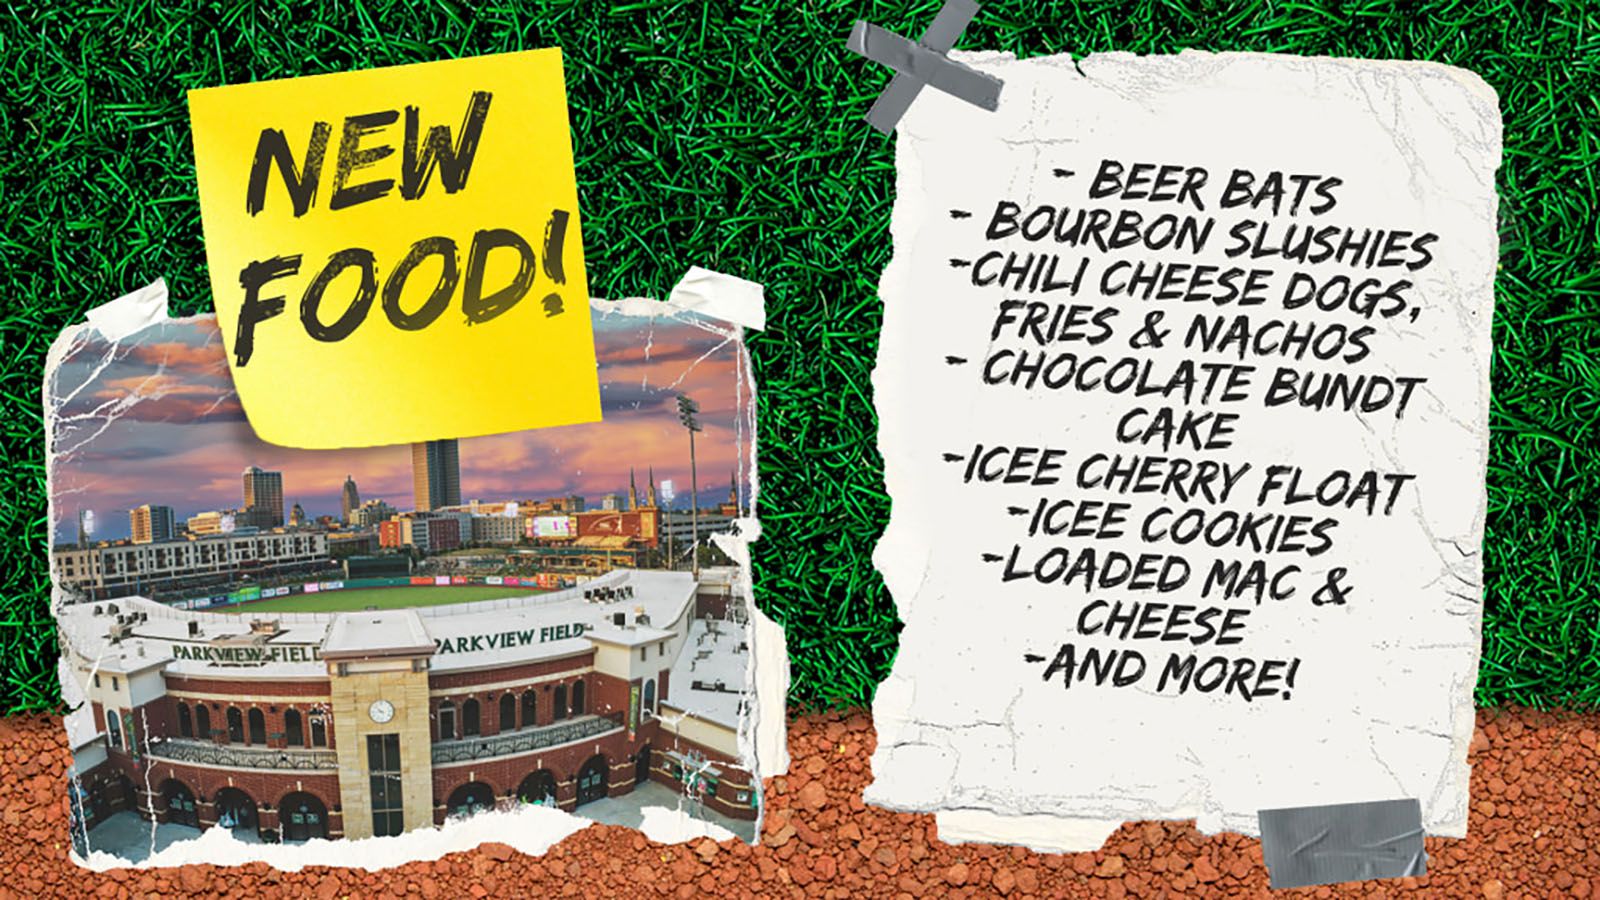 There will be plenty of new options at Parkview Field this summer.